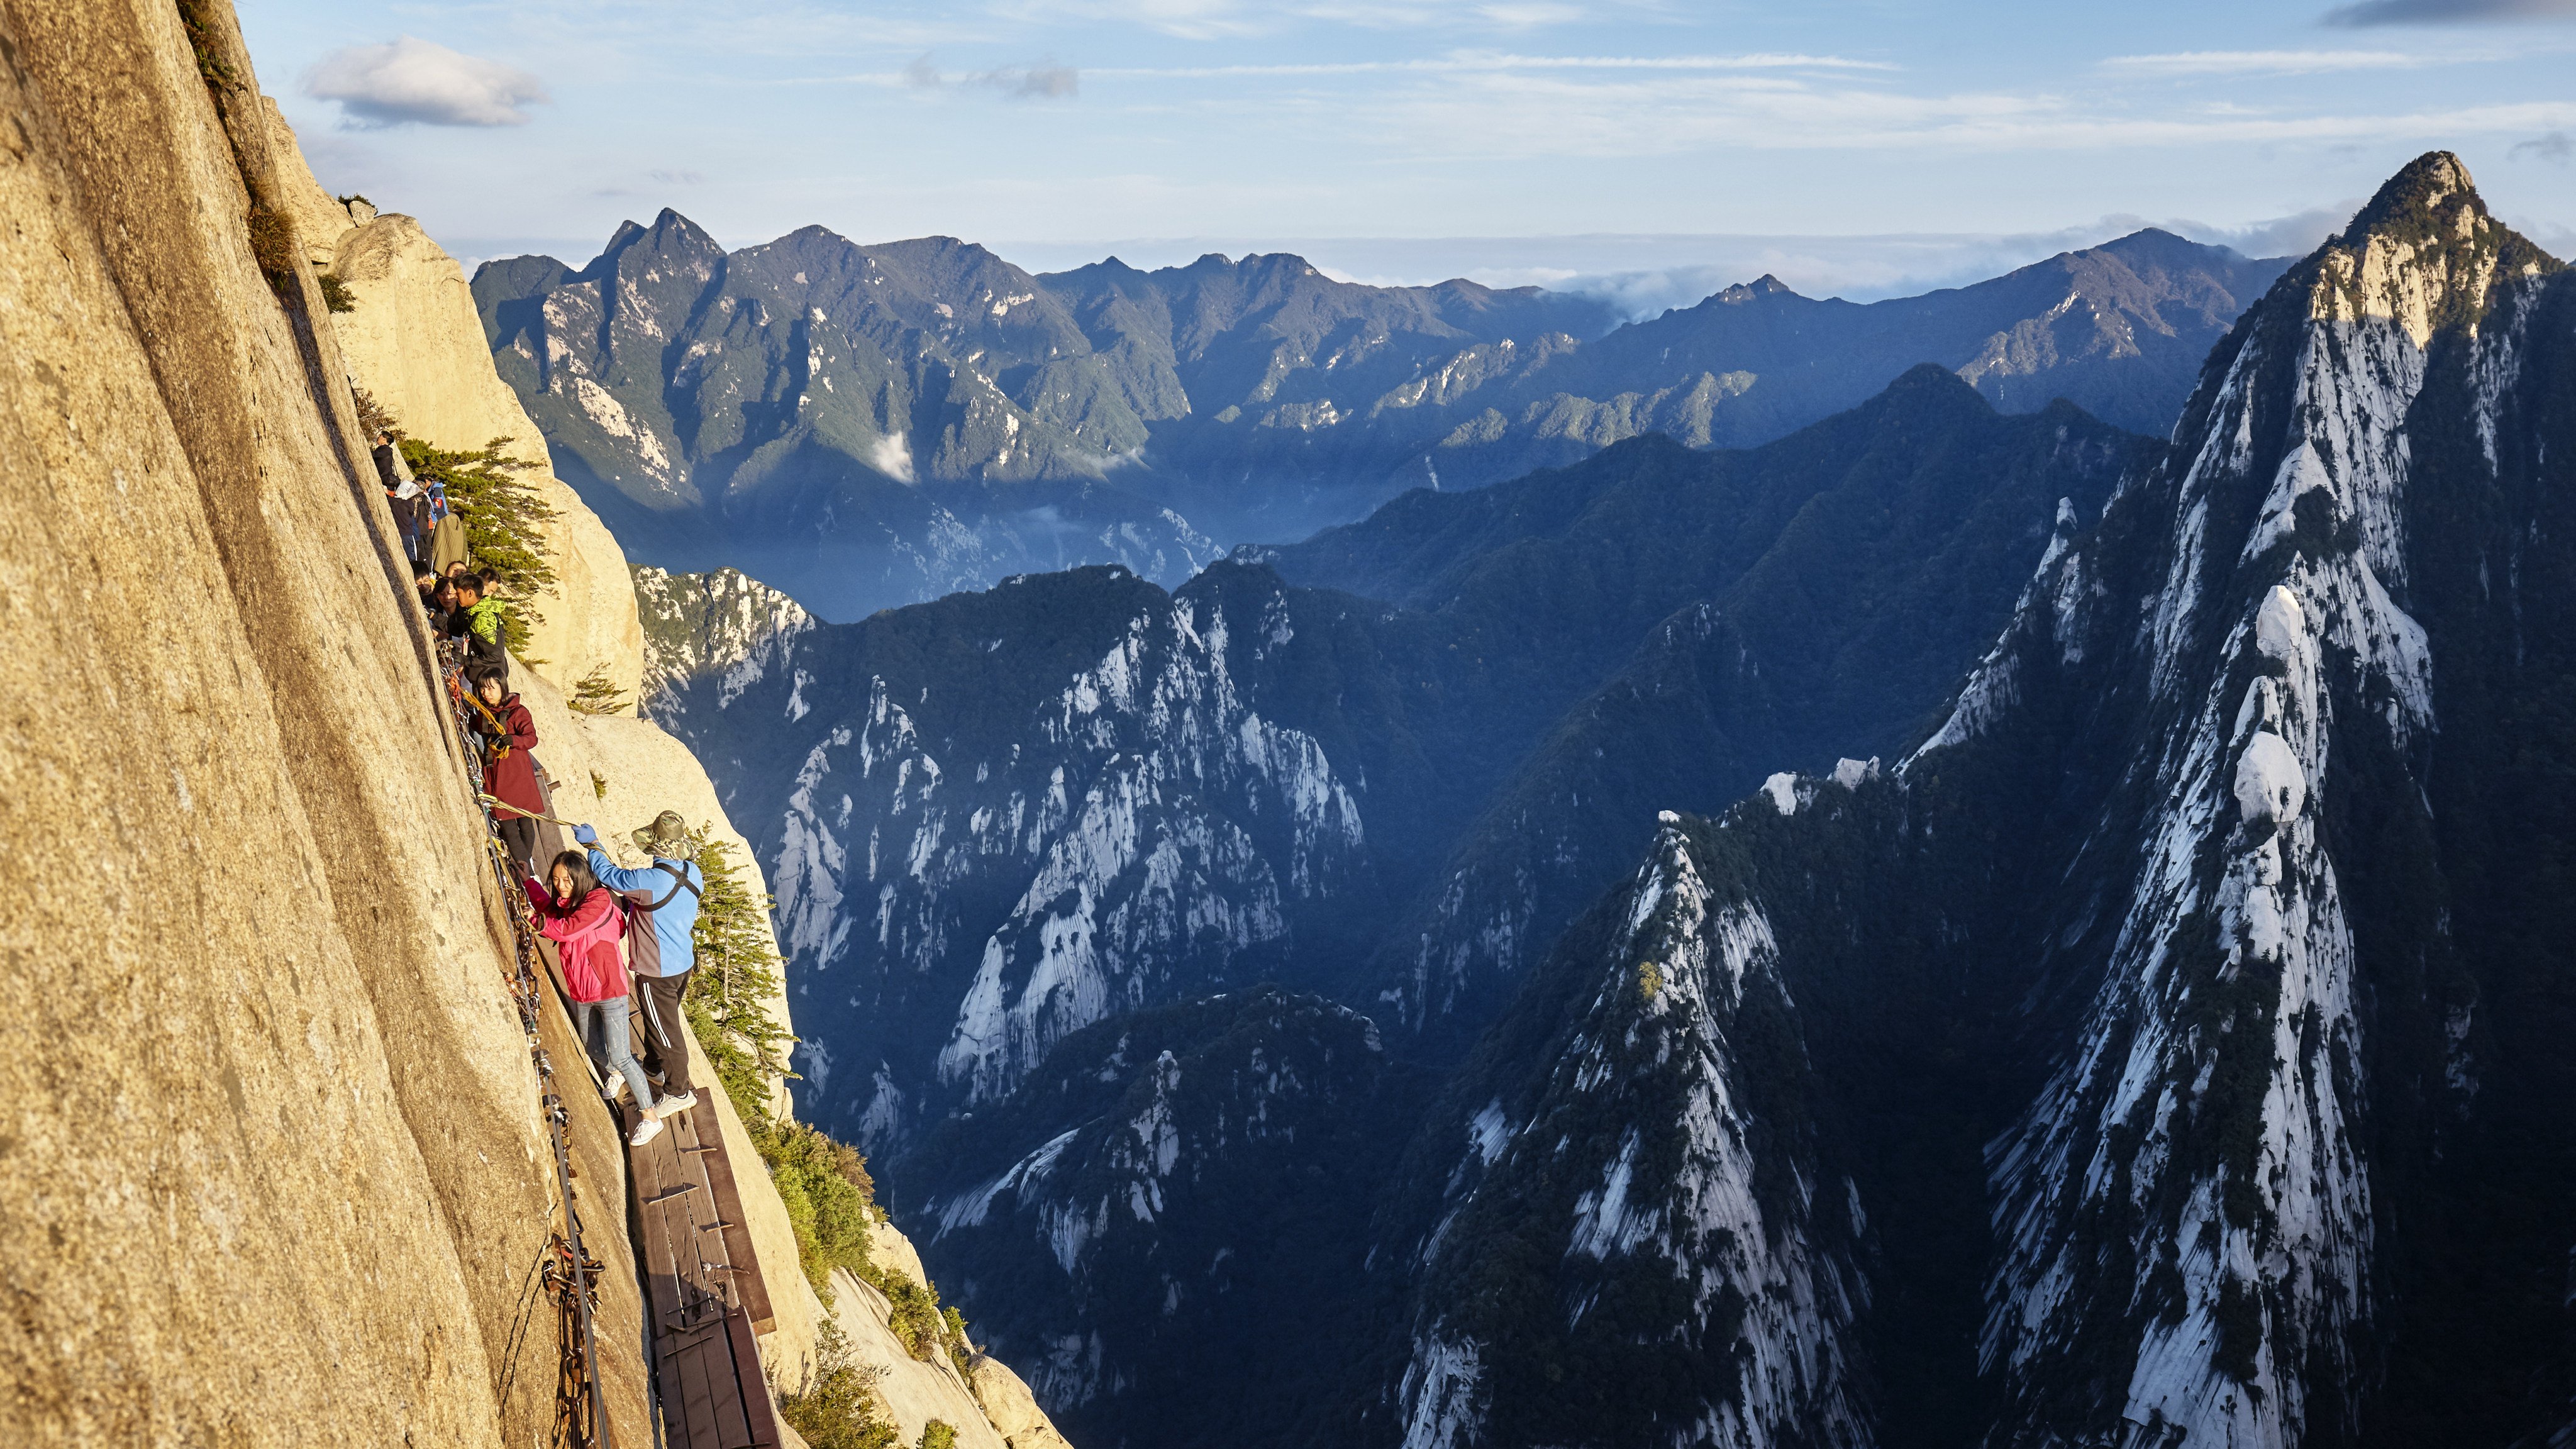 Tourists take on the “plank walk”, among the world’s most dangerous trails. Photo: Shutterstock Images